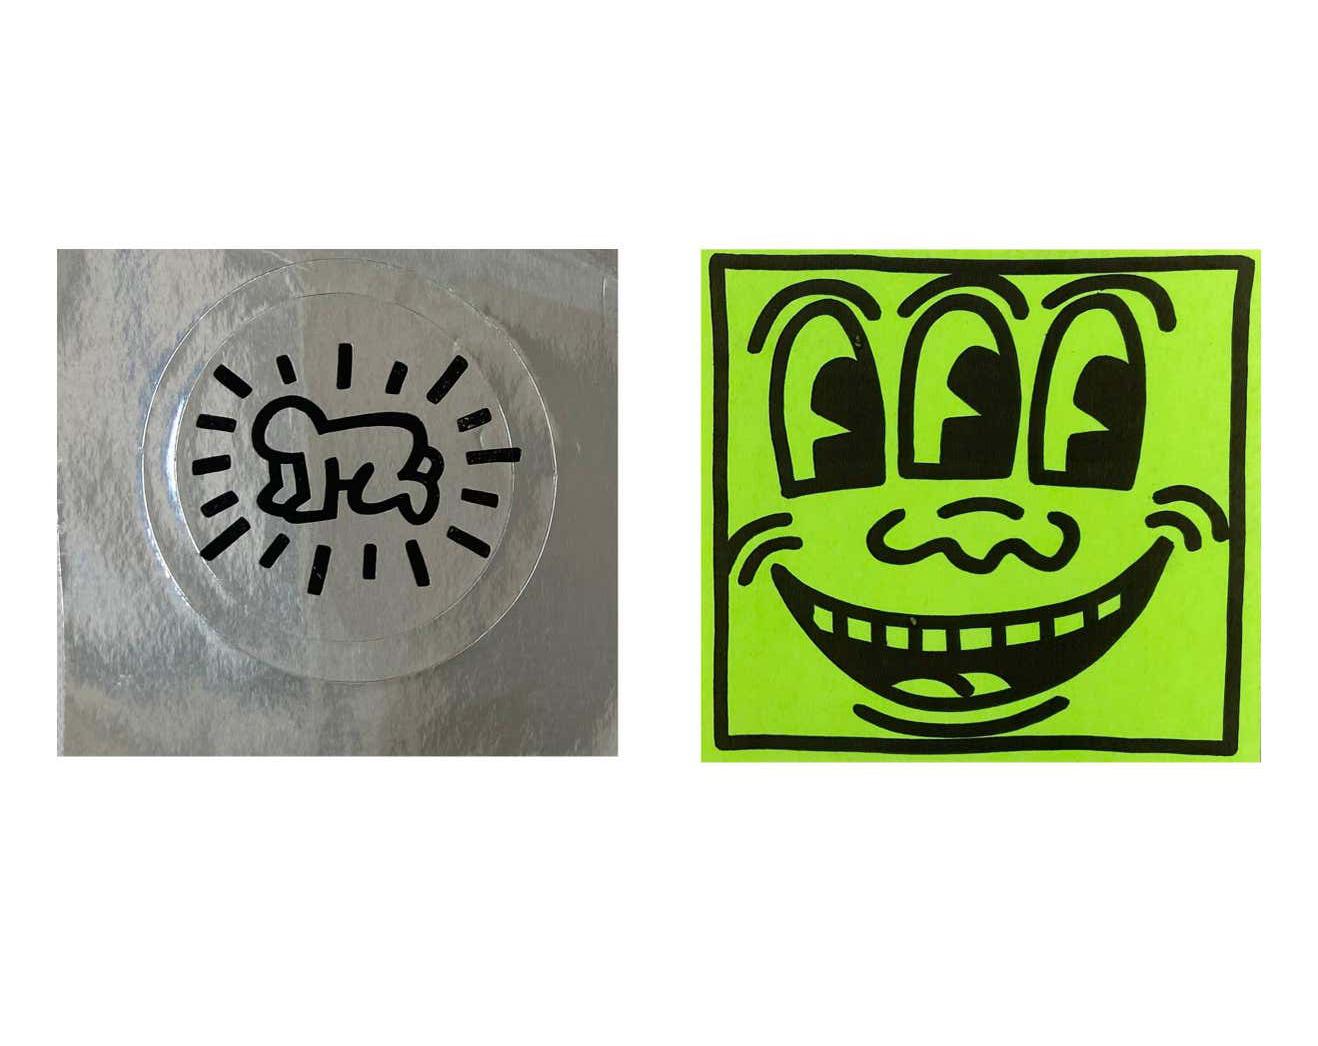 Keith Haring Crawling Baby & Three Eyed Smiling Face stickers circa early/ mid 80s. Set of 2.

Originally produced by Haring for his first solo gallery exhibition in 1982, then later sold/given out at Haring's New York Pop Shop throughout the 1980s.